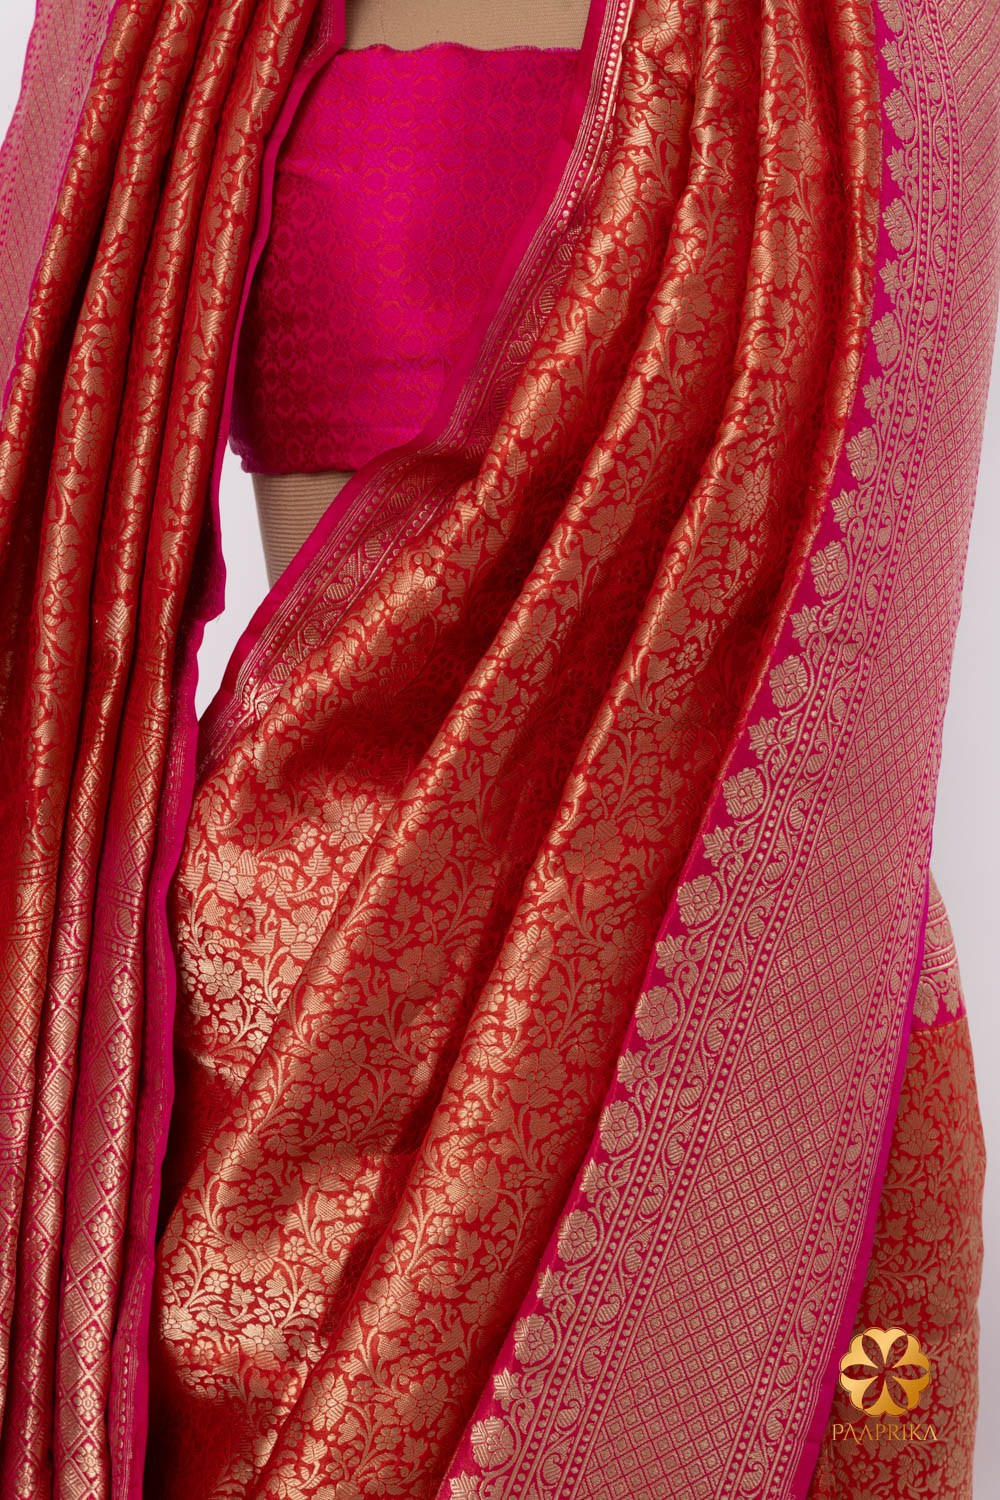 A folded section of the saree, highlighting the brocade patterns.